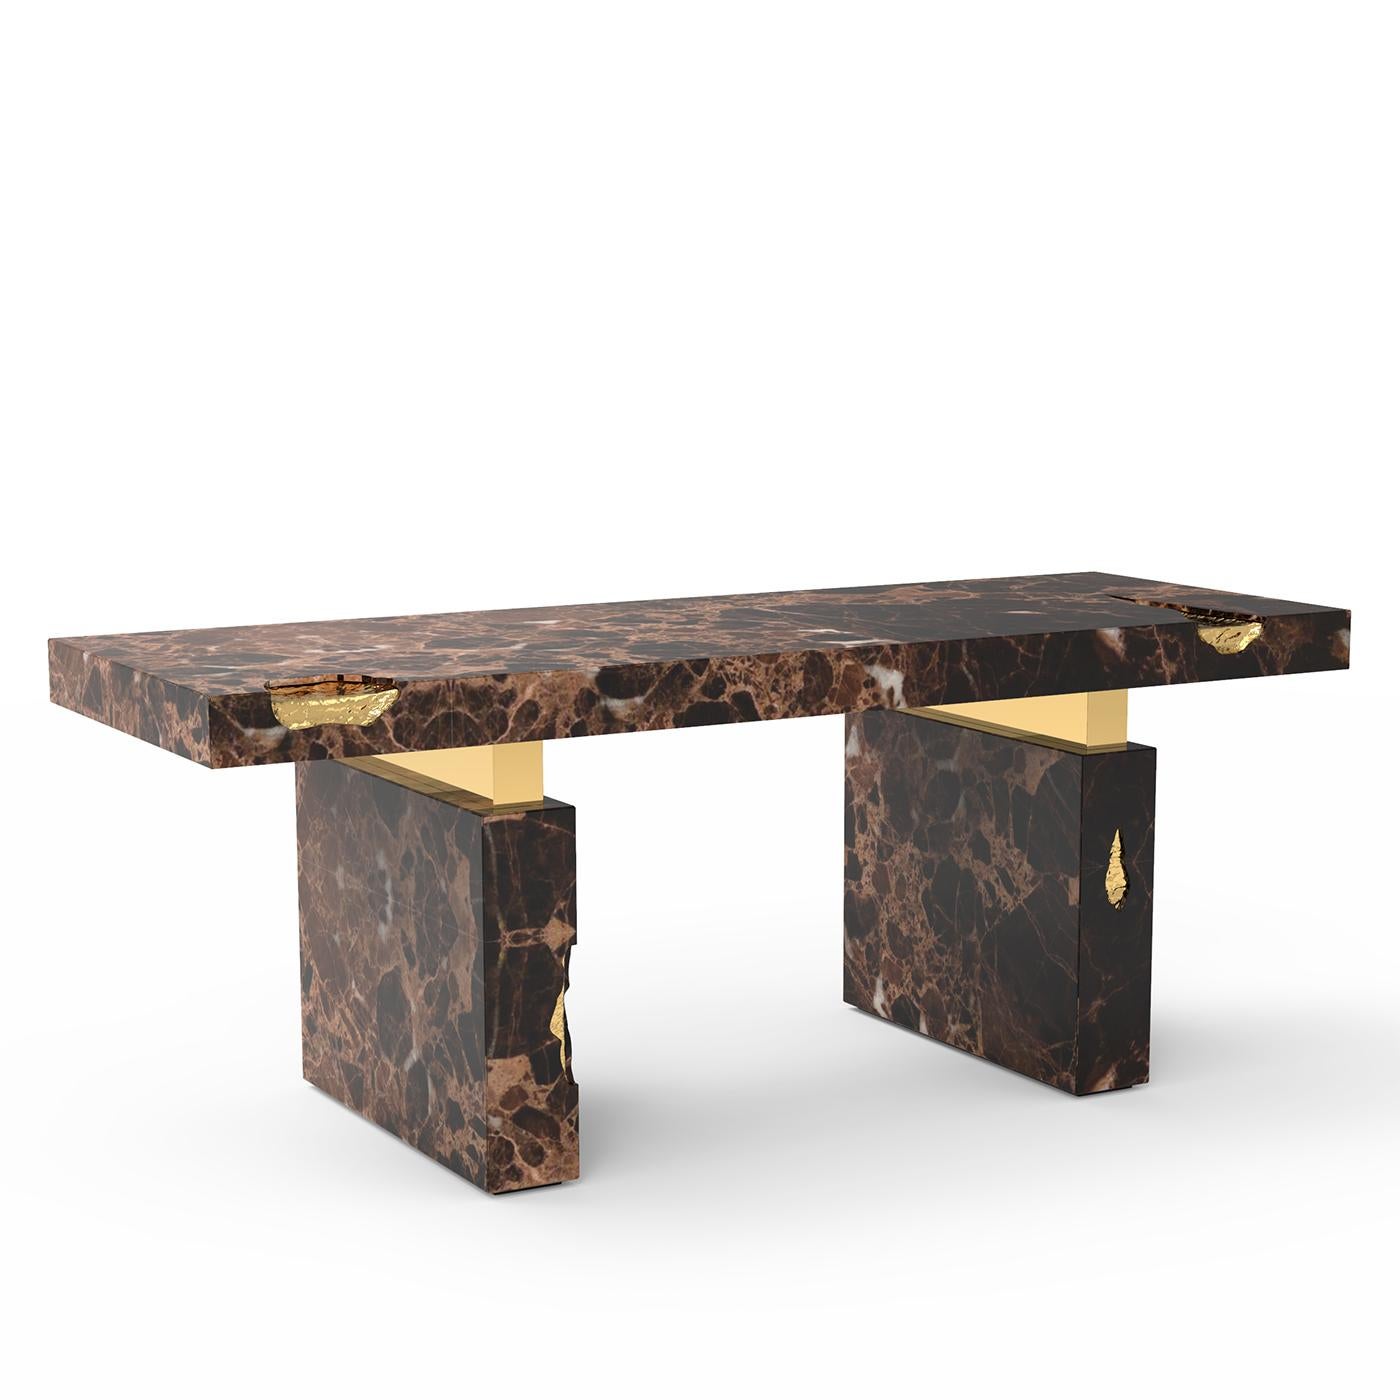 Desk majestic brown with 2 bases and top in solid
polished emperador brown marble with solid brass 
details in gold finish.